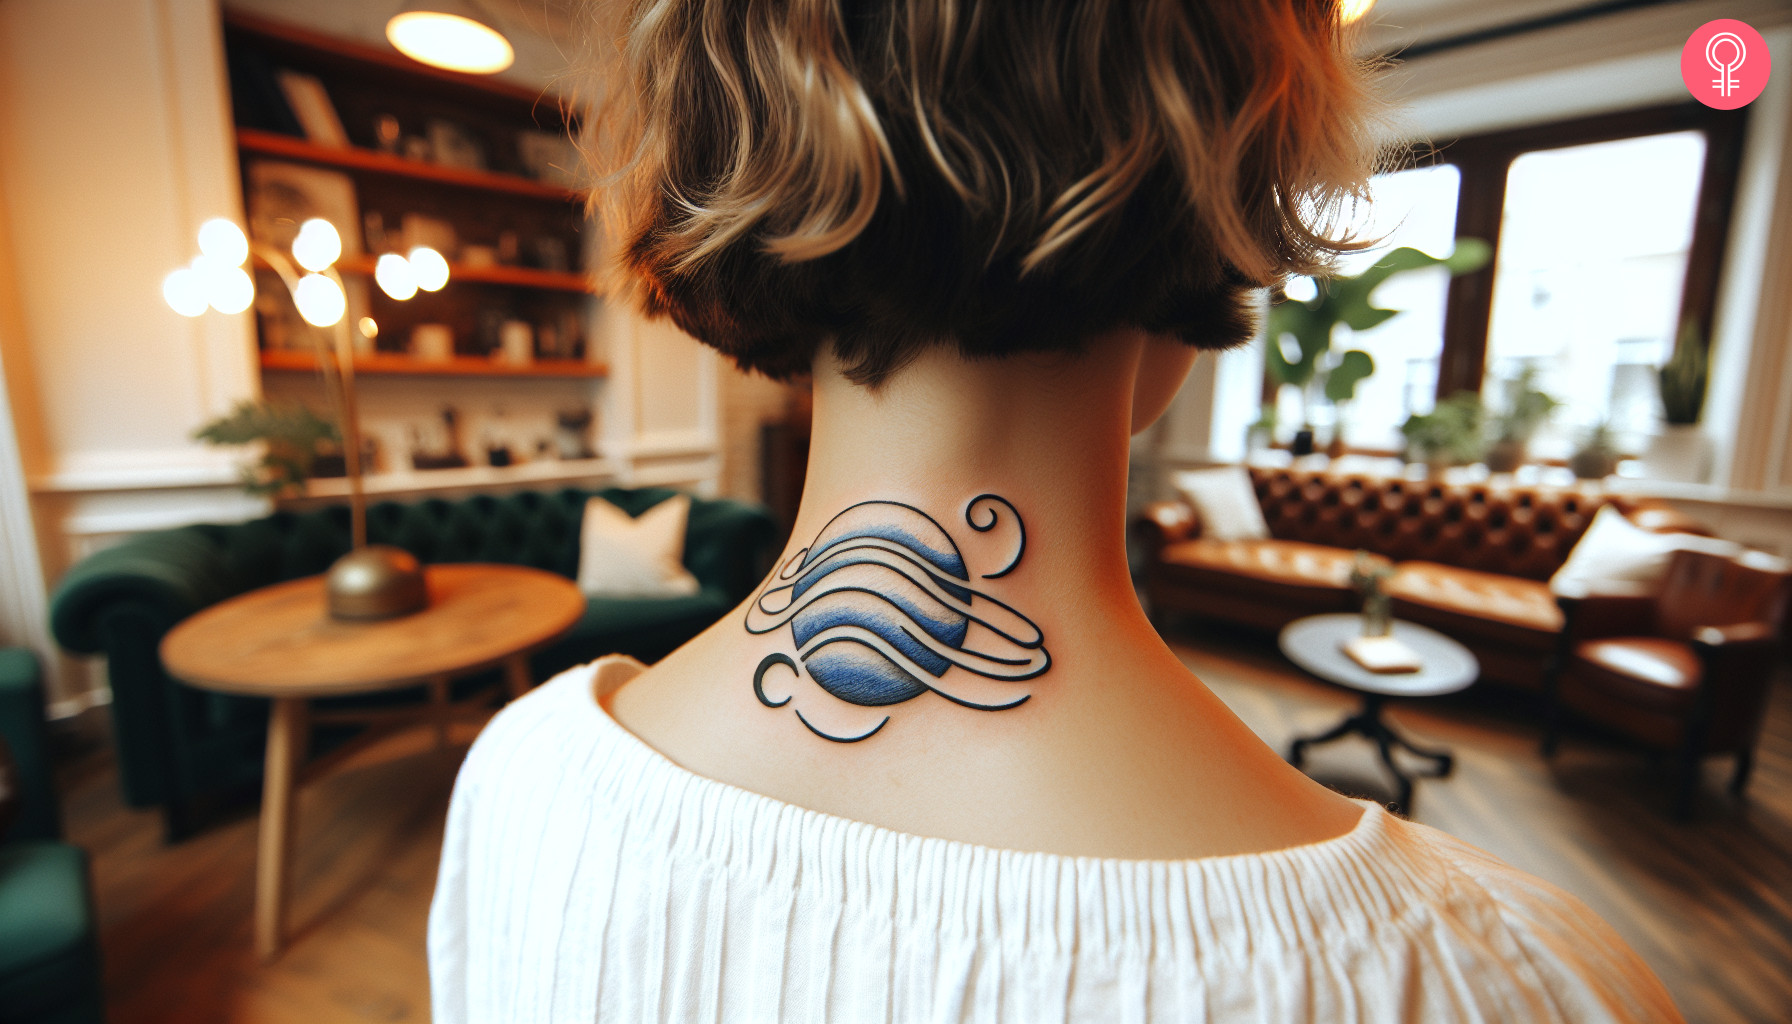 A Neptune drawing tattoo design on the neck of a woman